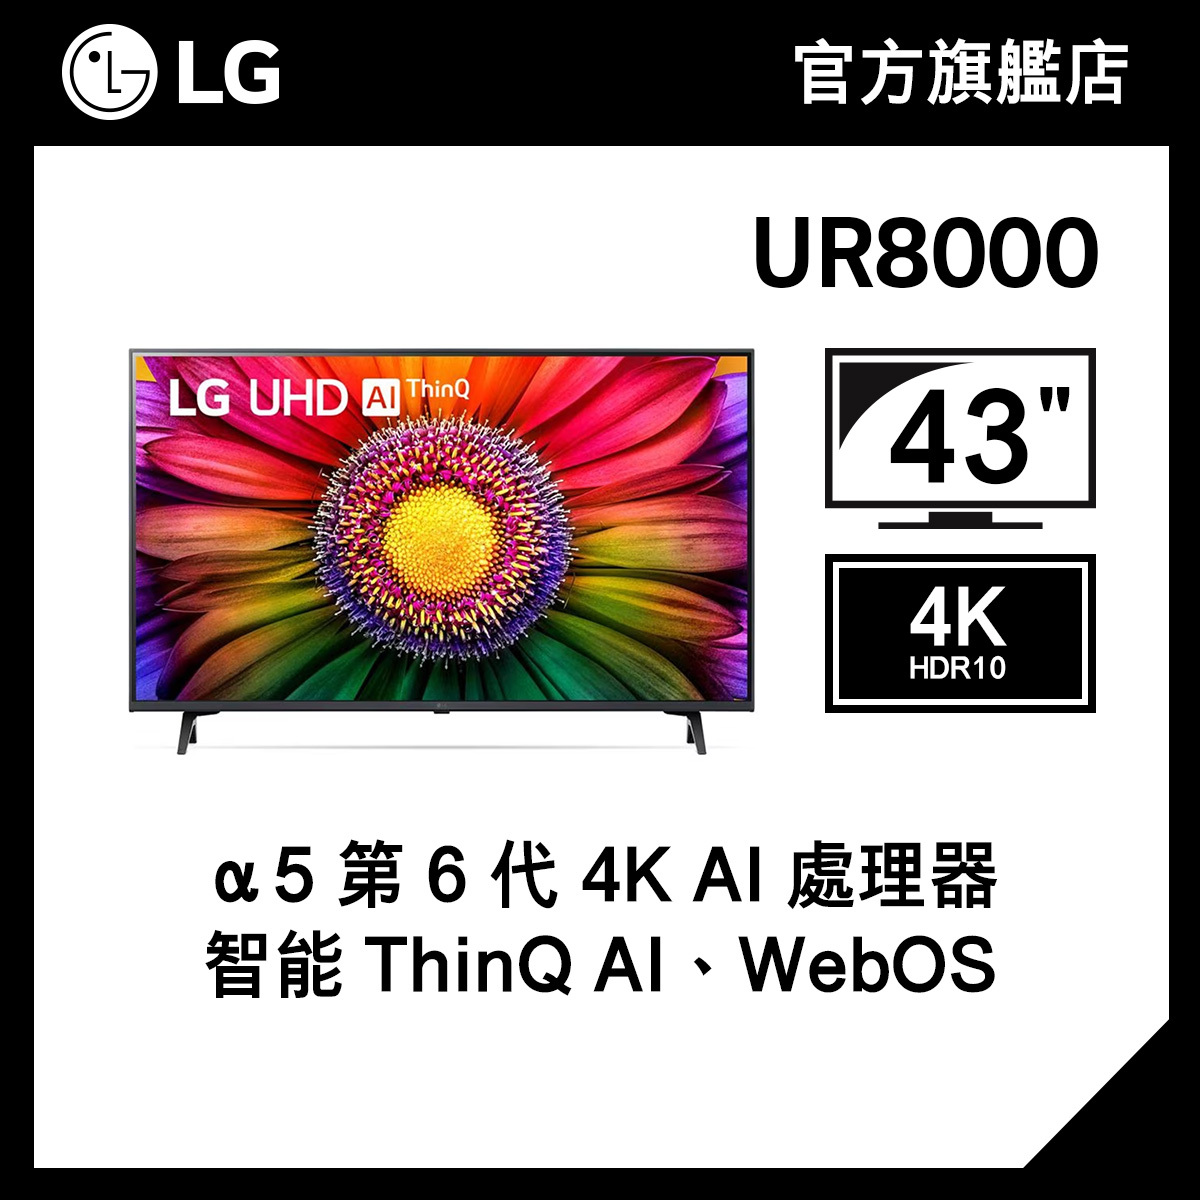 LG 43 UR8000 4K UHD AI ThinQ Smart TV with 4 Year Coverage